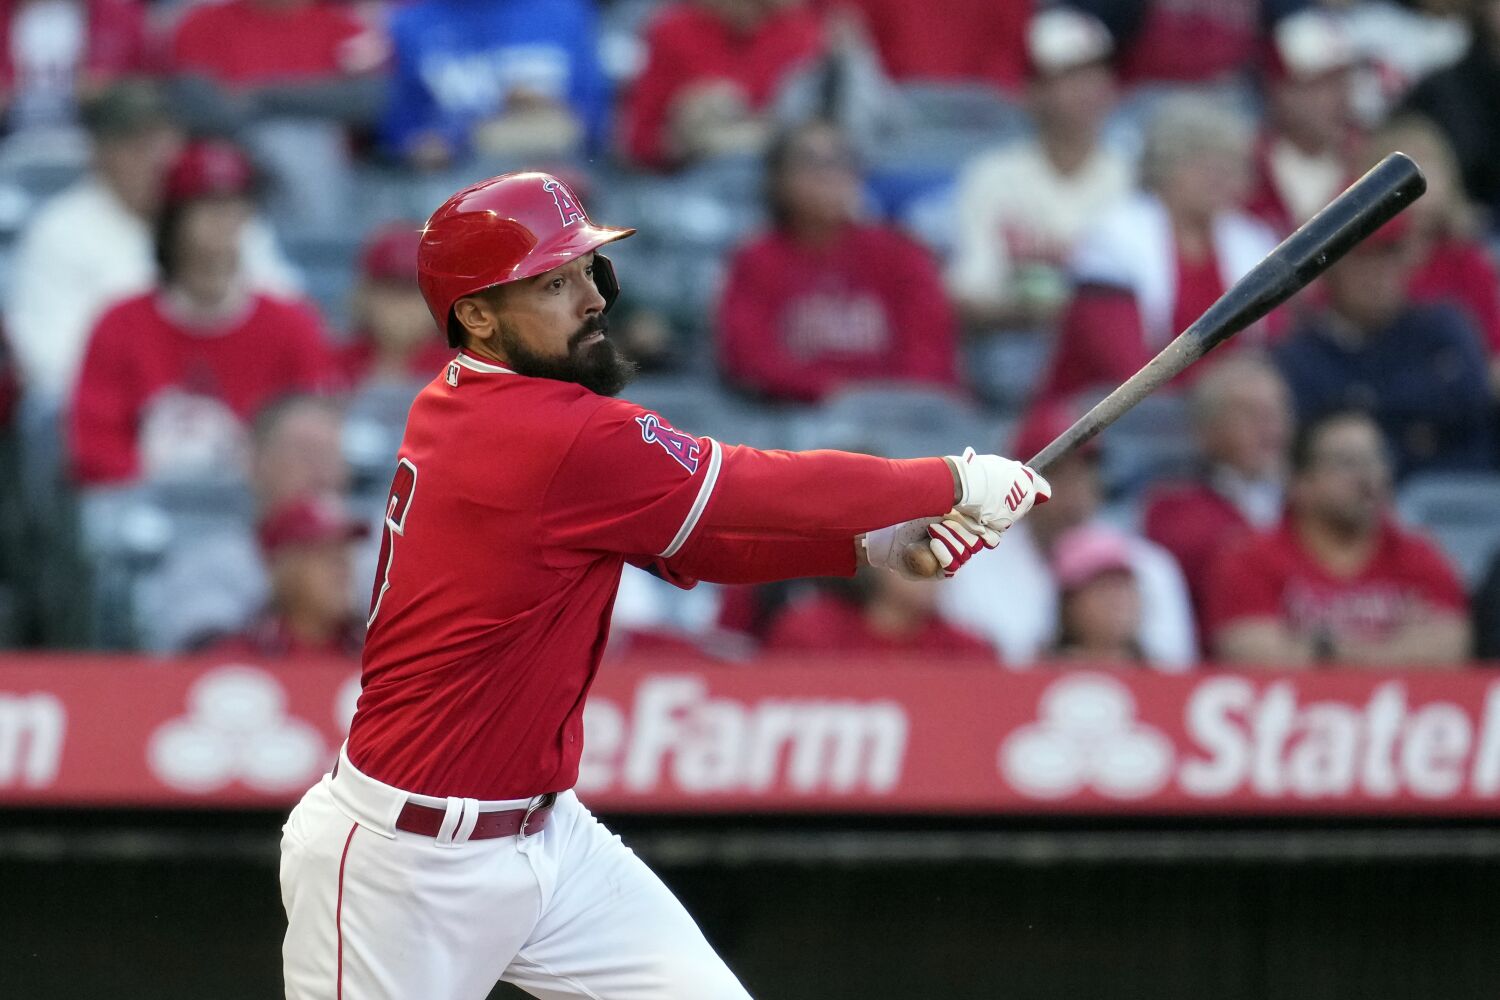 Angels' Anthony Rendon is caught on video cursing at fan, grabbing his clothing